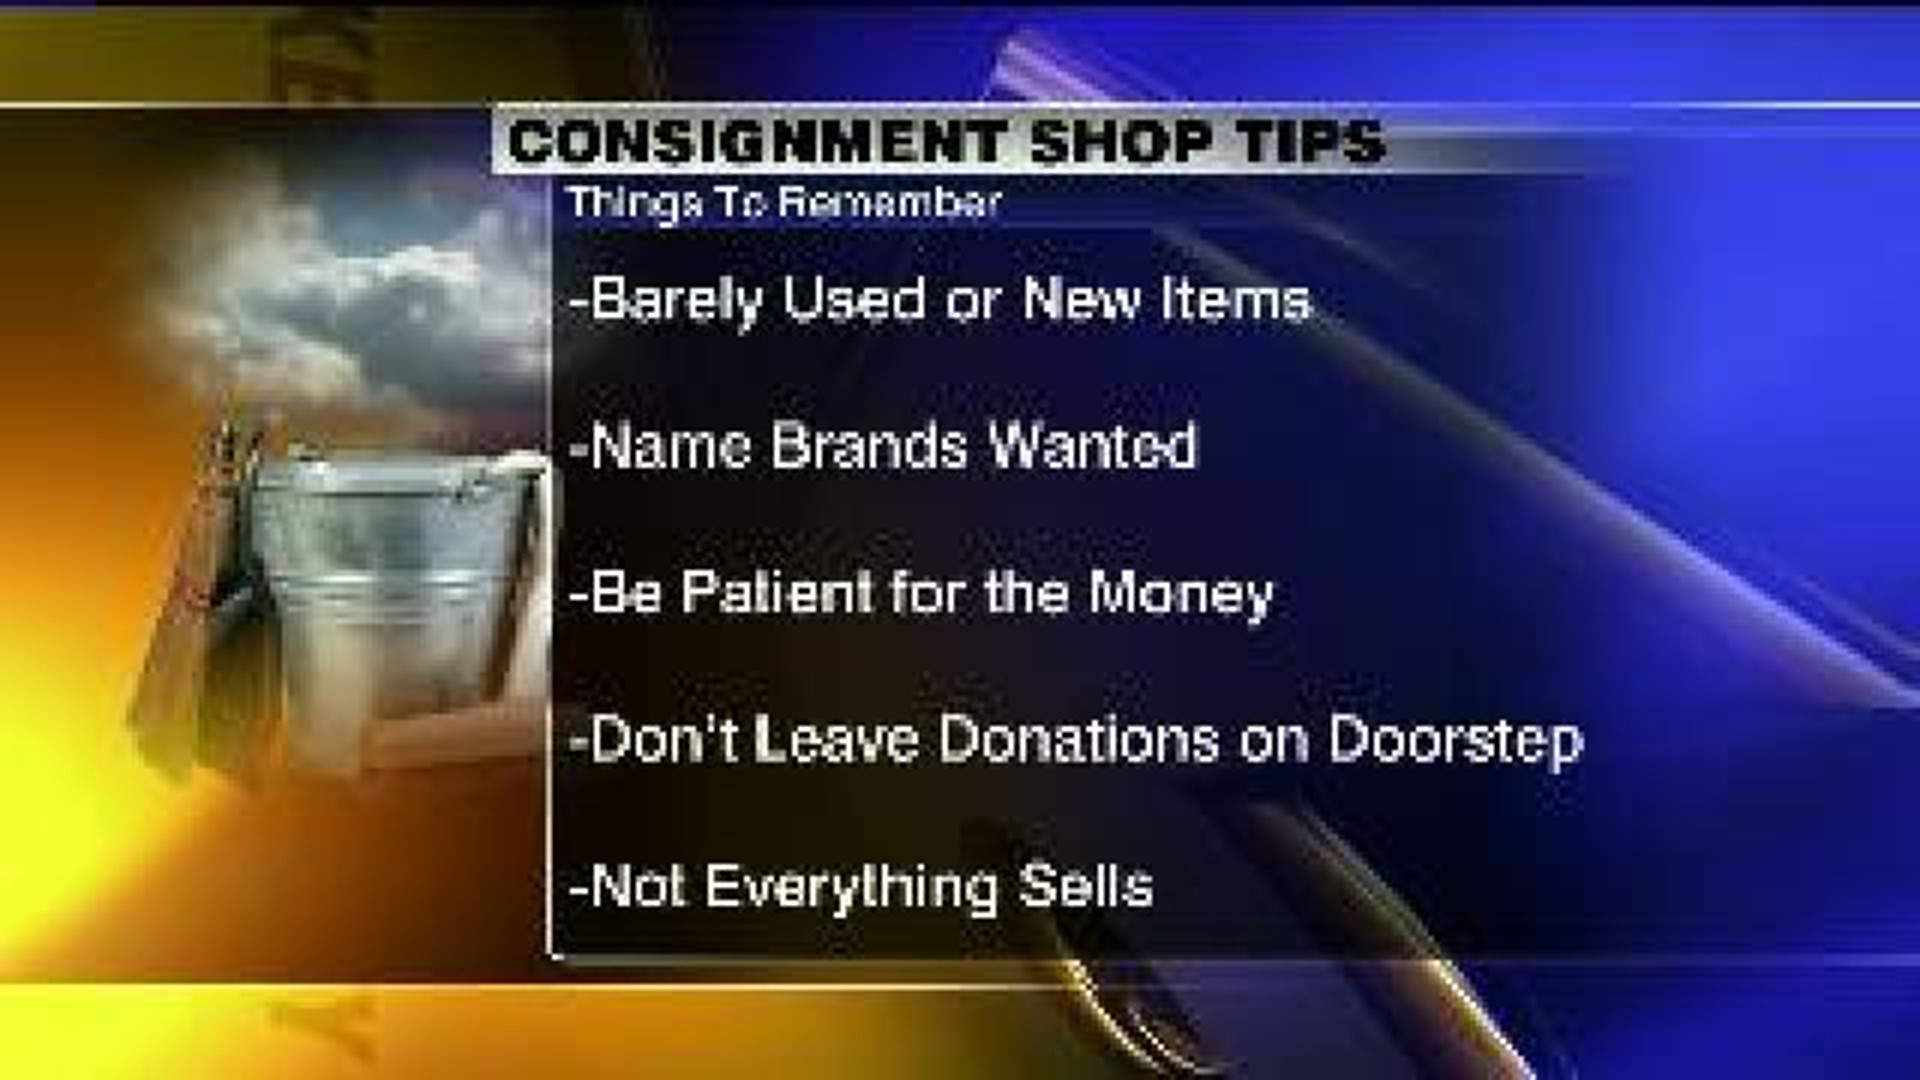 Consignment Shop Tips